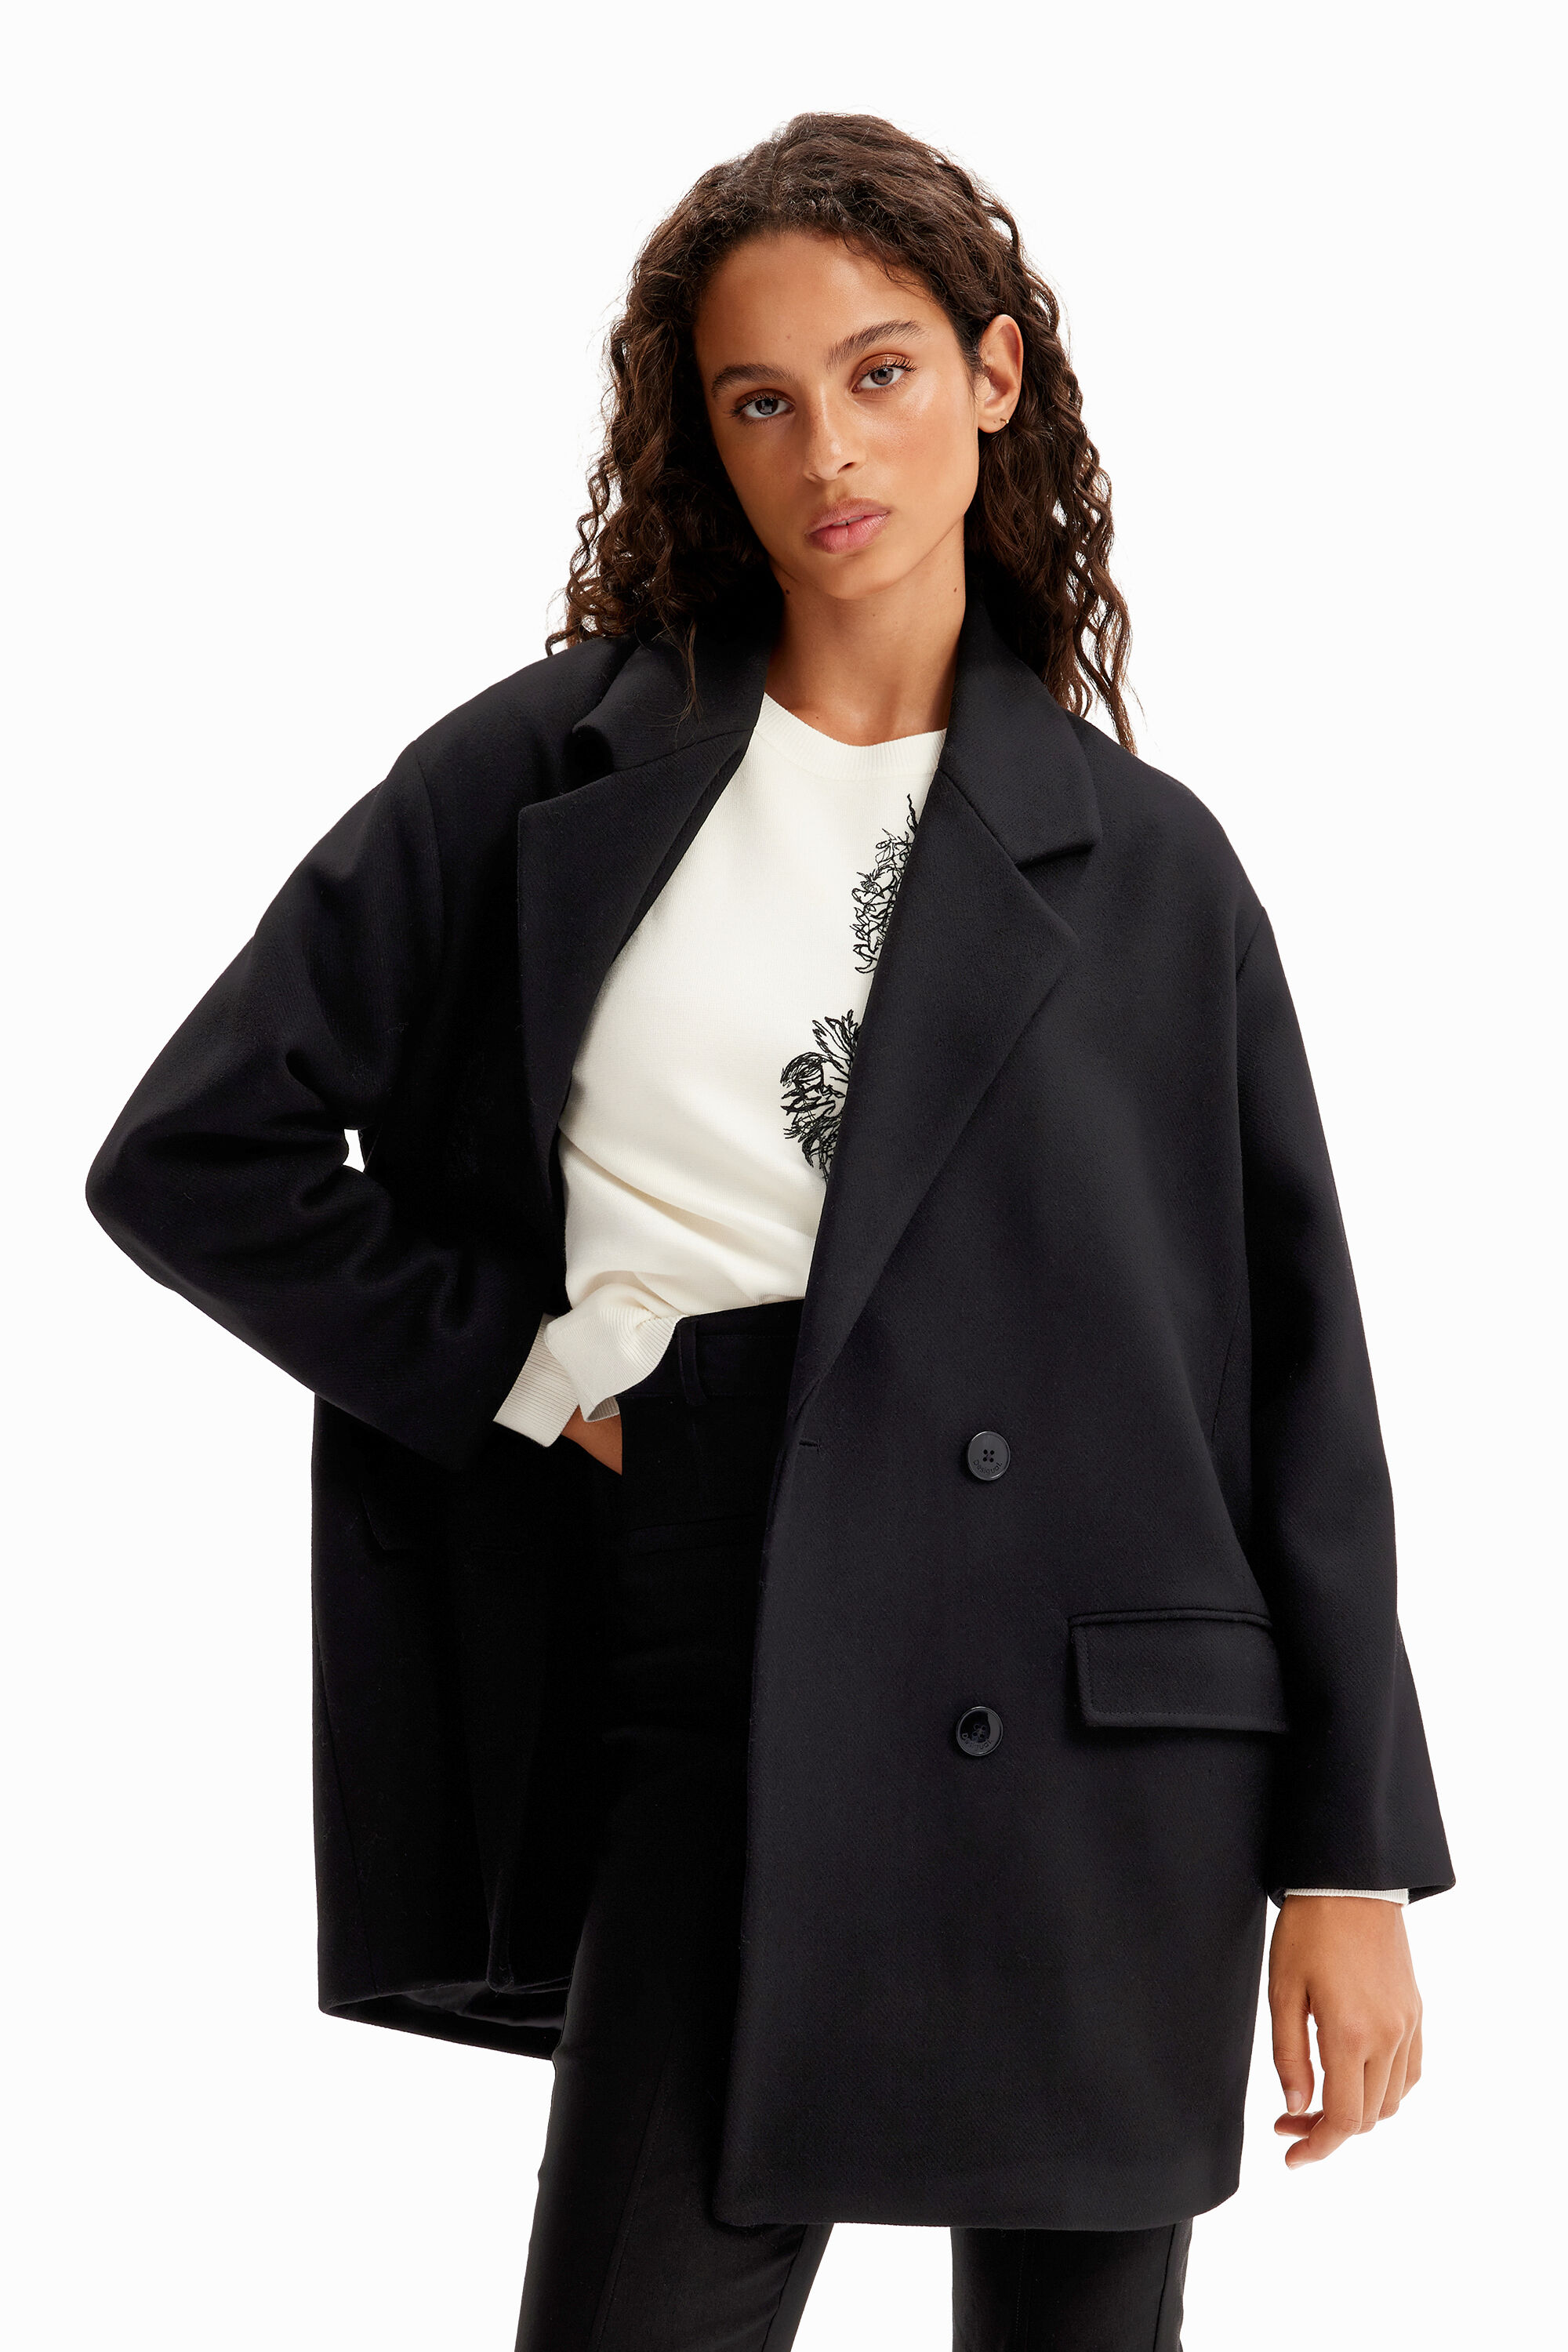 M. Christian Lacroix double-breasted wool coat - BLACK - L